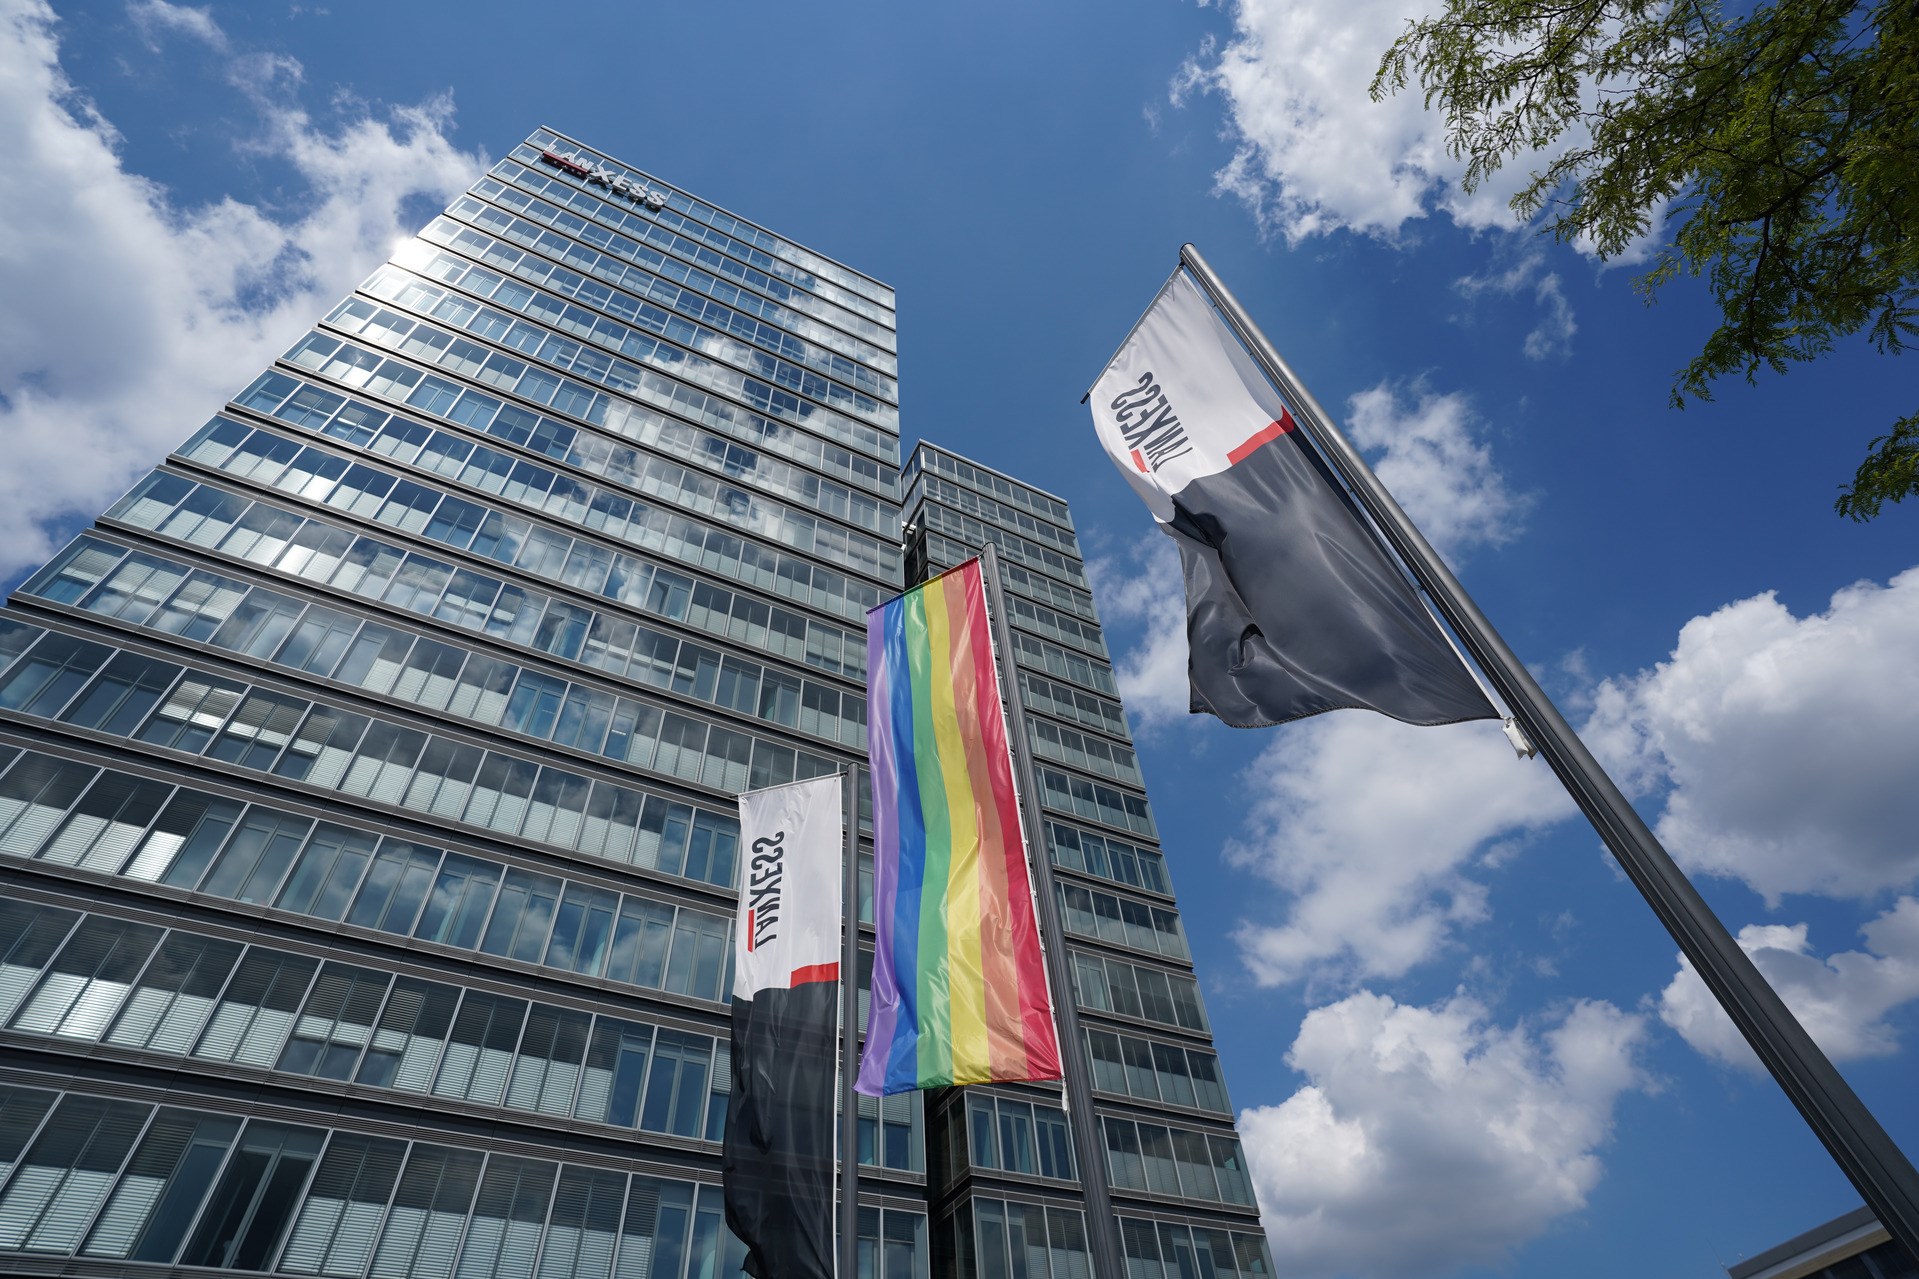 LANXESS Tower, Cologne, flag, rainbow flag, CSD, Christopher Street Day